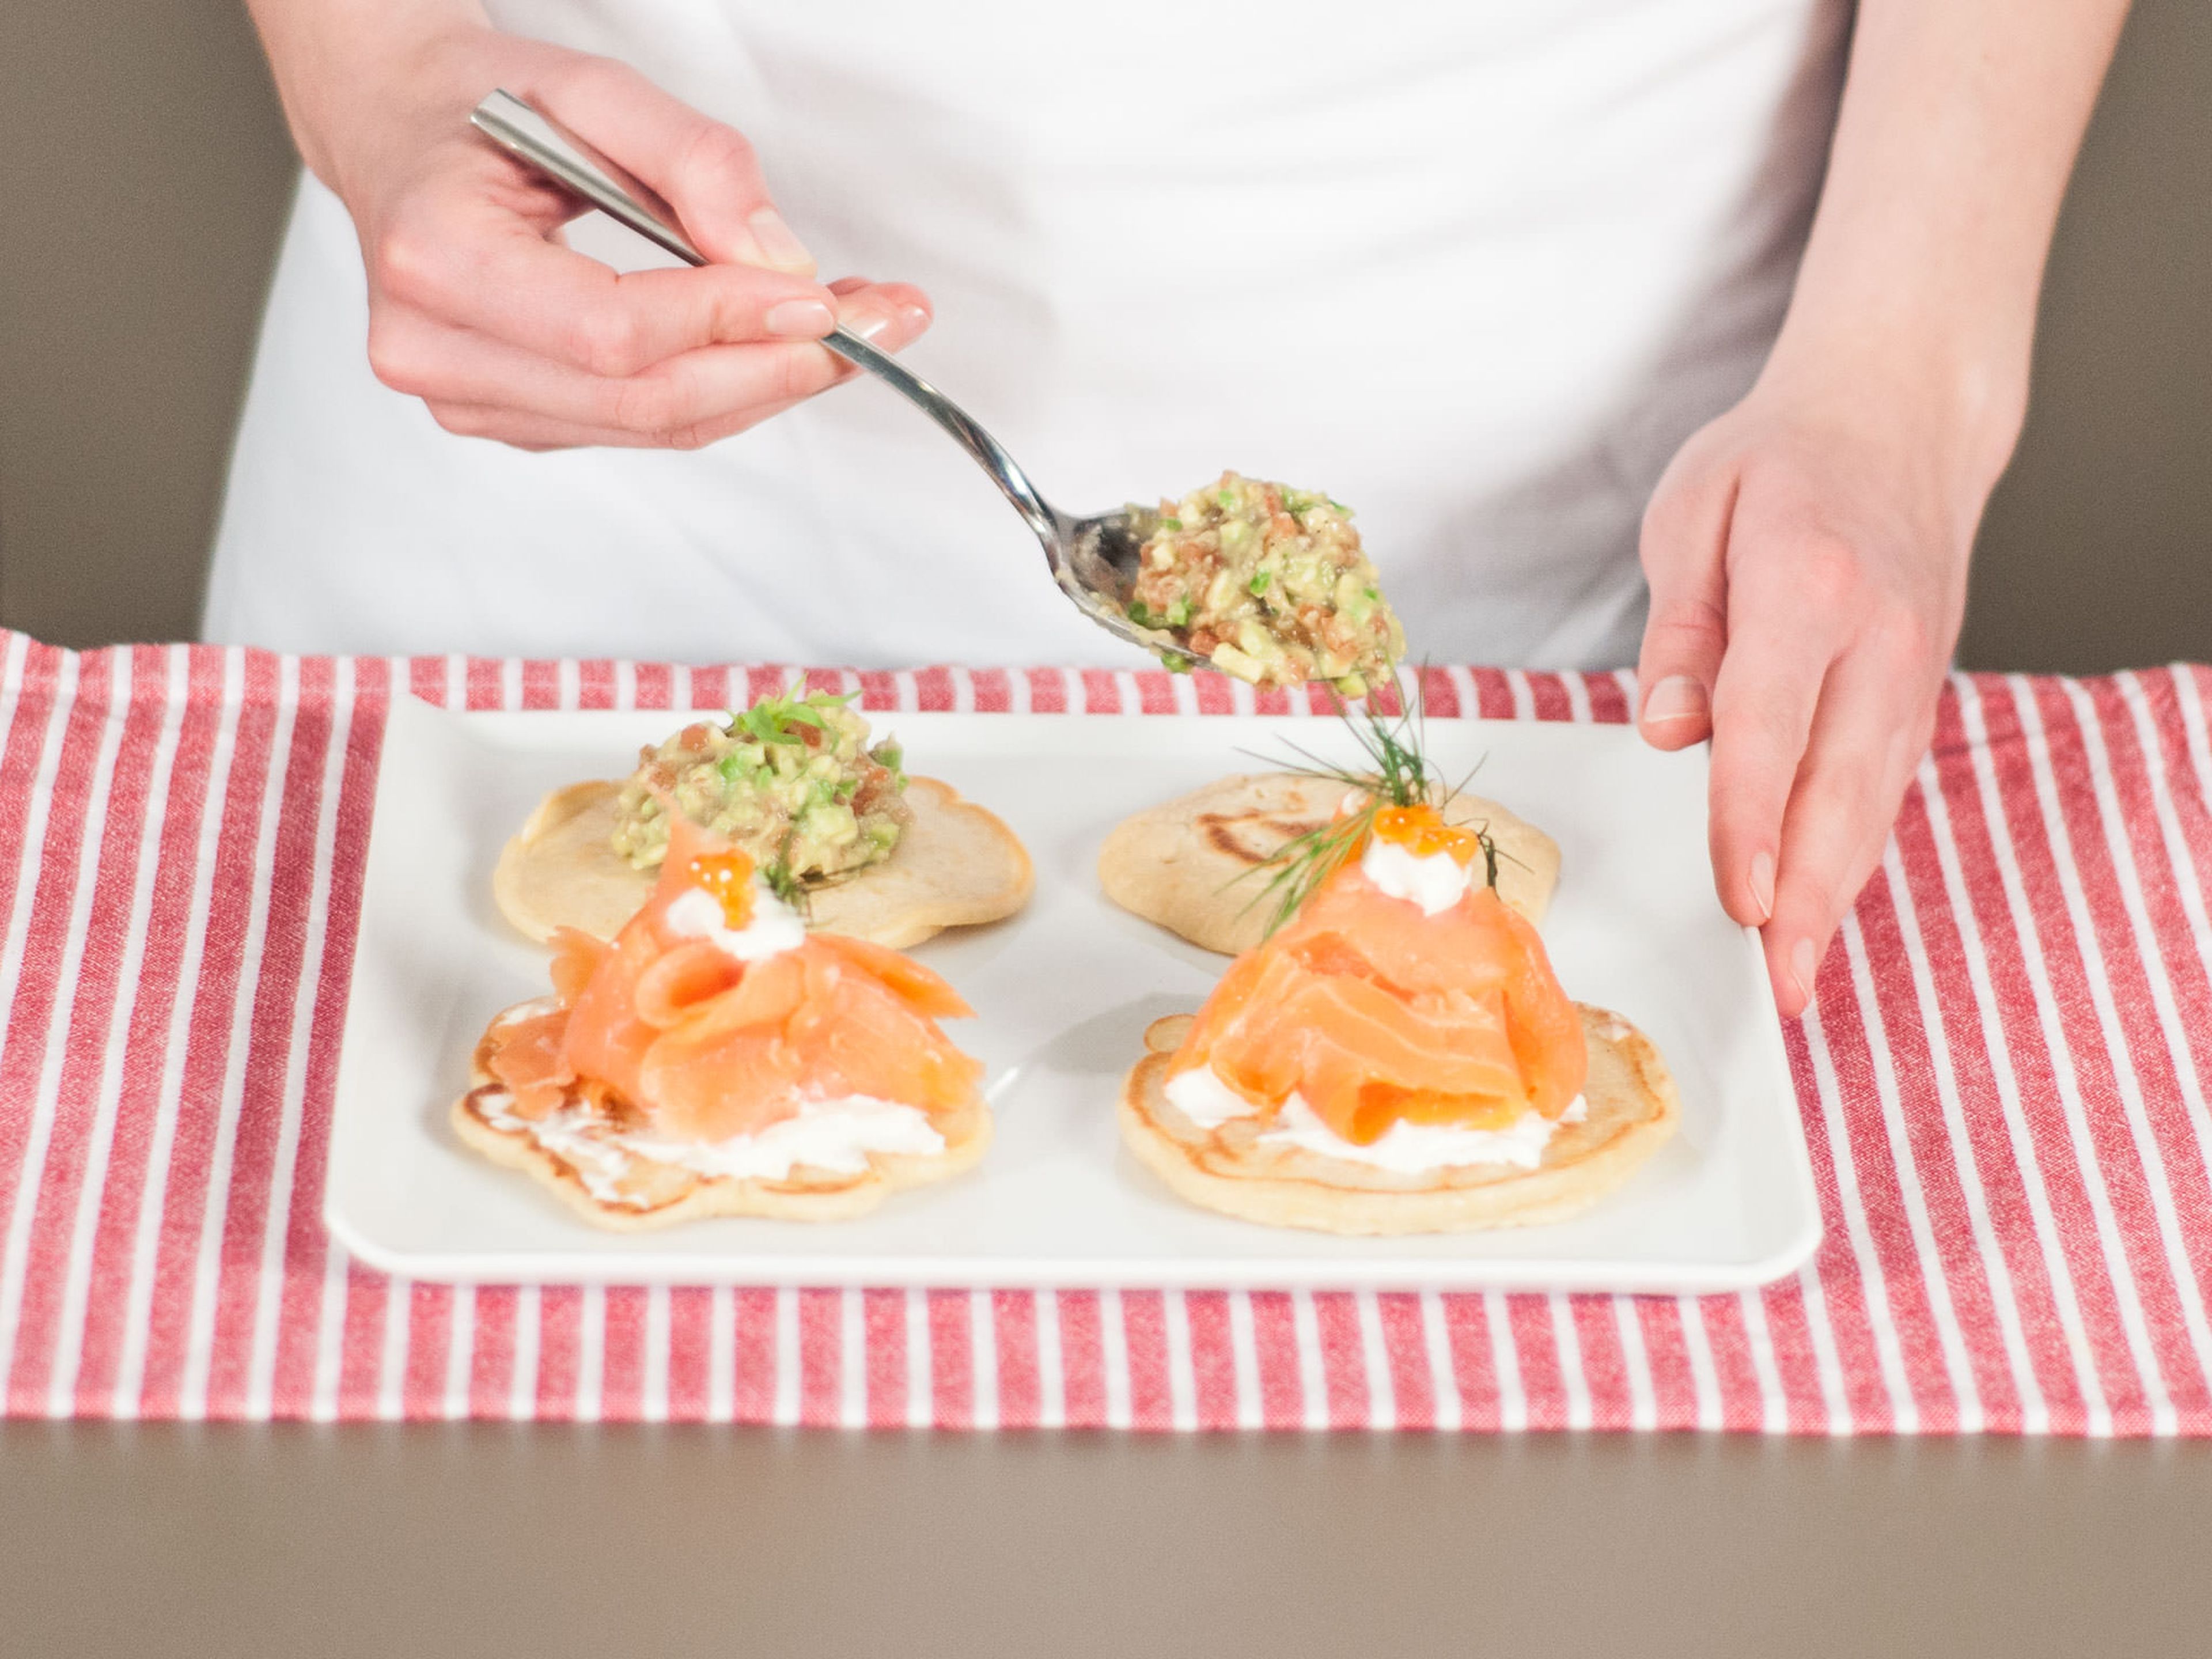 Garnish half of the blinis with a dollop of cream cheese. Divide salmon into bite-sized pieces. Place salmon on cream cheese and top with caviar. Place avocado-tomato tartare on the rest of blinis. Serve with more dill if desired. Enjoy as a starter, breakfast or snack.